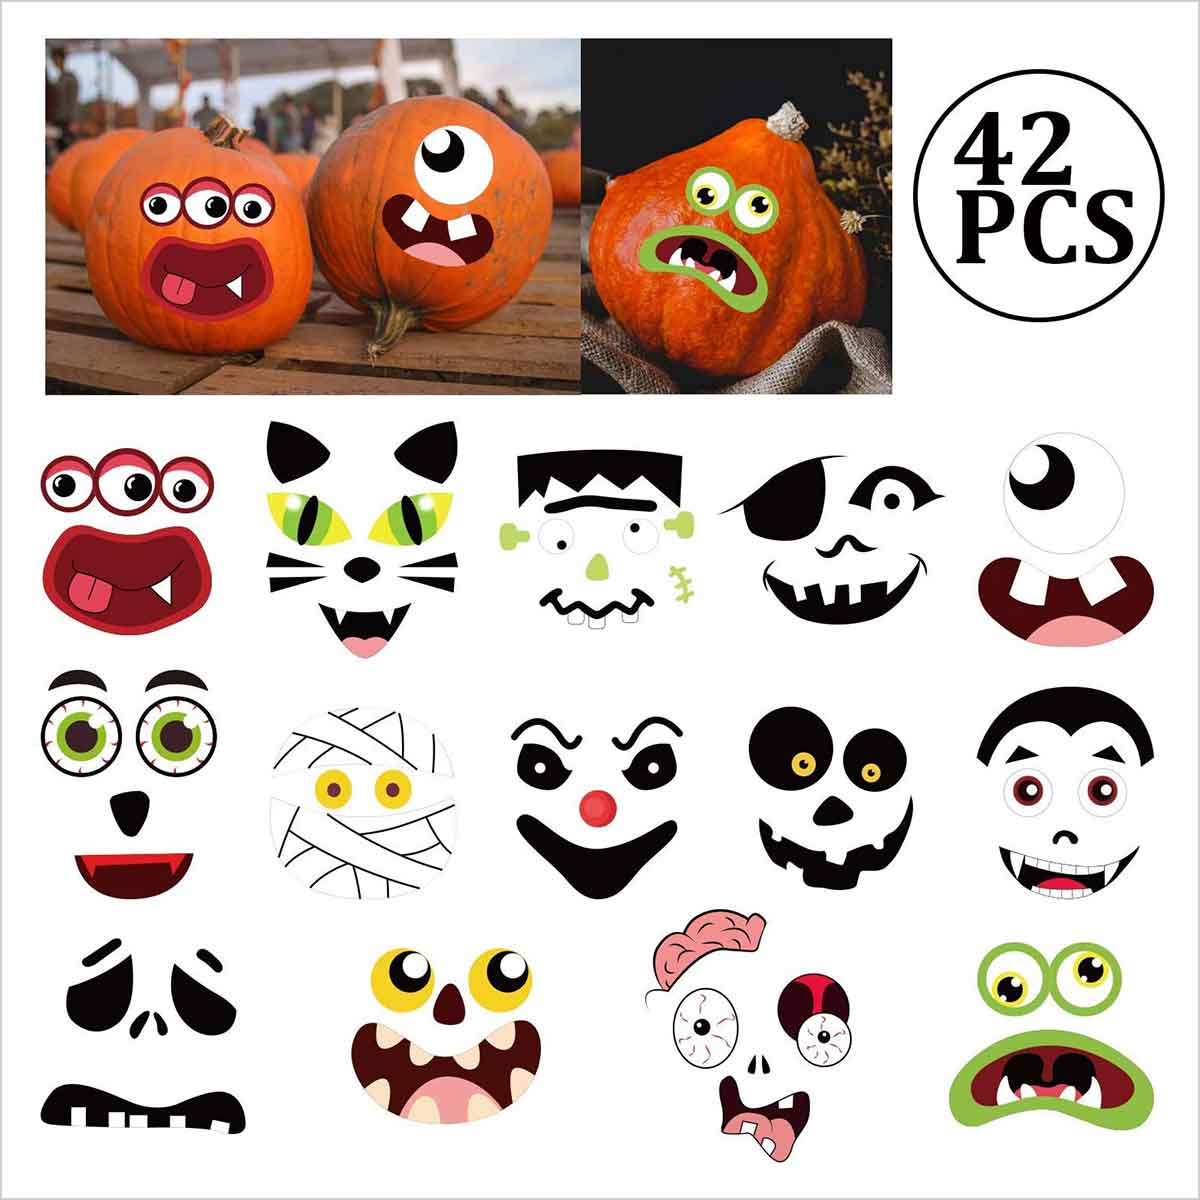 Jack-o-Lantern Decoration Kit Cute Halloween Decor Idea 36 Total DIY Face Stickers Gifts Halloween Pumpkin Decorating Stickers 6 x 9 14 Large Sheets Treats and Crafts for Kids